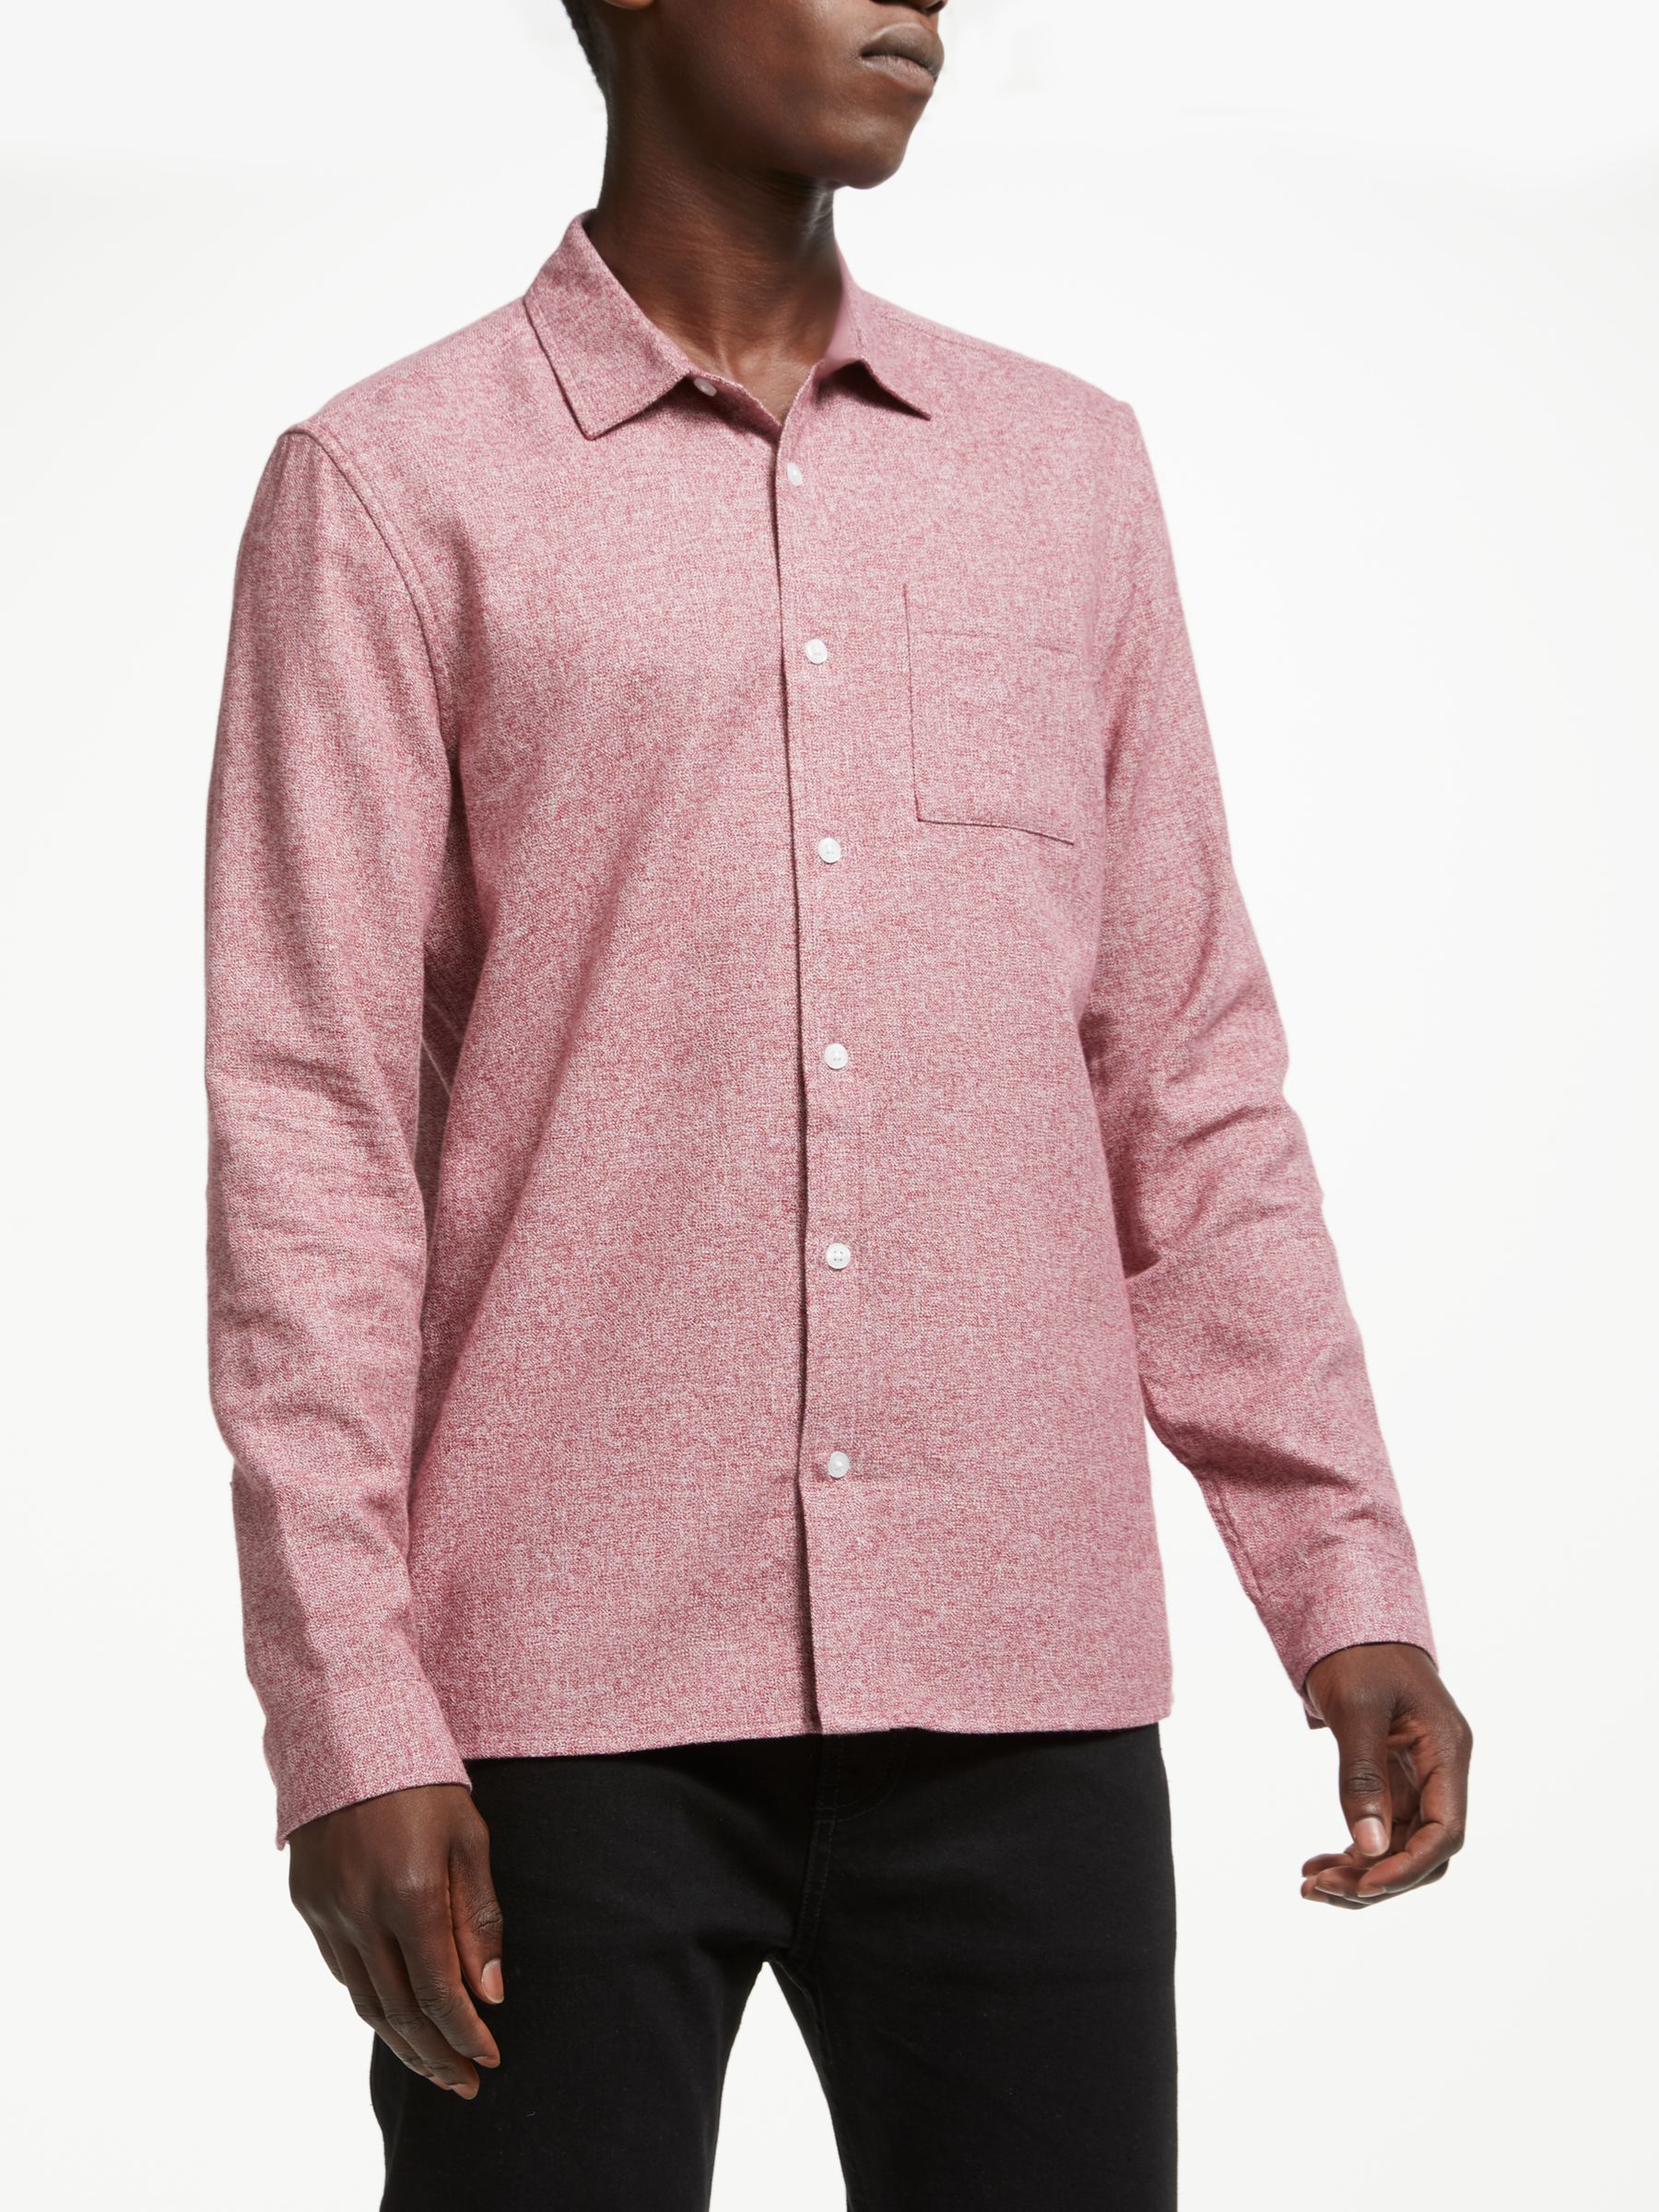 Kin Compact Berry Grindle Shirt